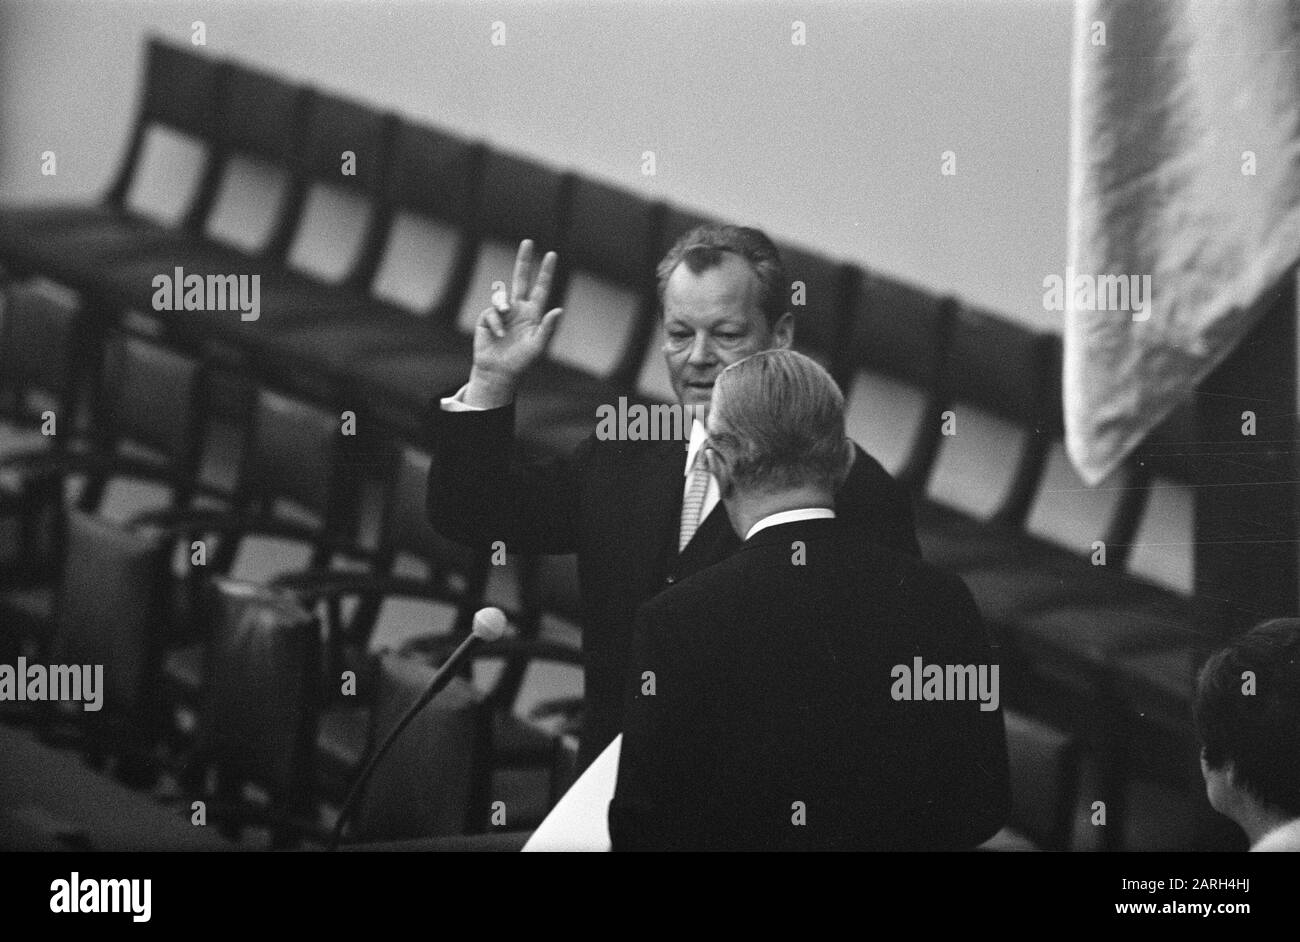 Willy Brandt (SPD) elected Chancellor of West Germany in Bonn. President of Bundestag of Hassel, Willy Brandt took the oath Date: 21 October 1969 Location: Bonn, Germany Keywords: BONDDAG, Chancellors, Chairmen Personal Name: Brandt, Willy Institution Name: SPD Stock Photo